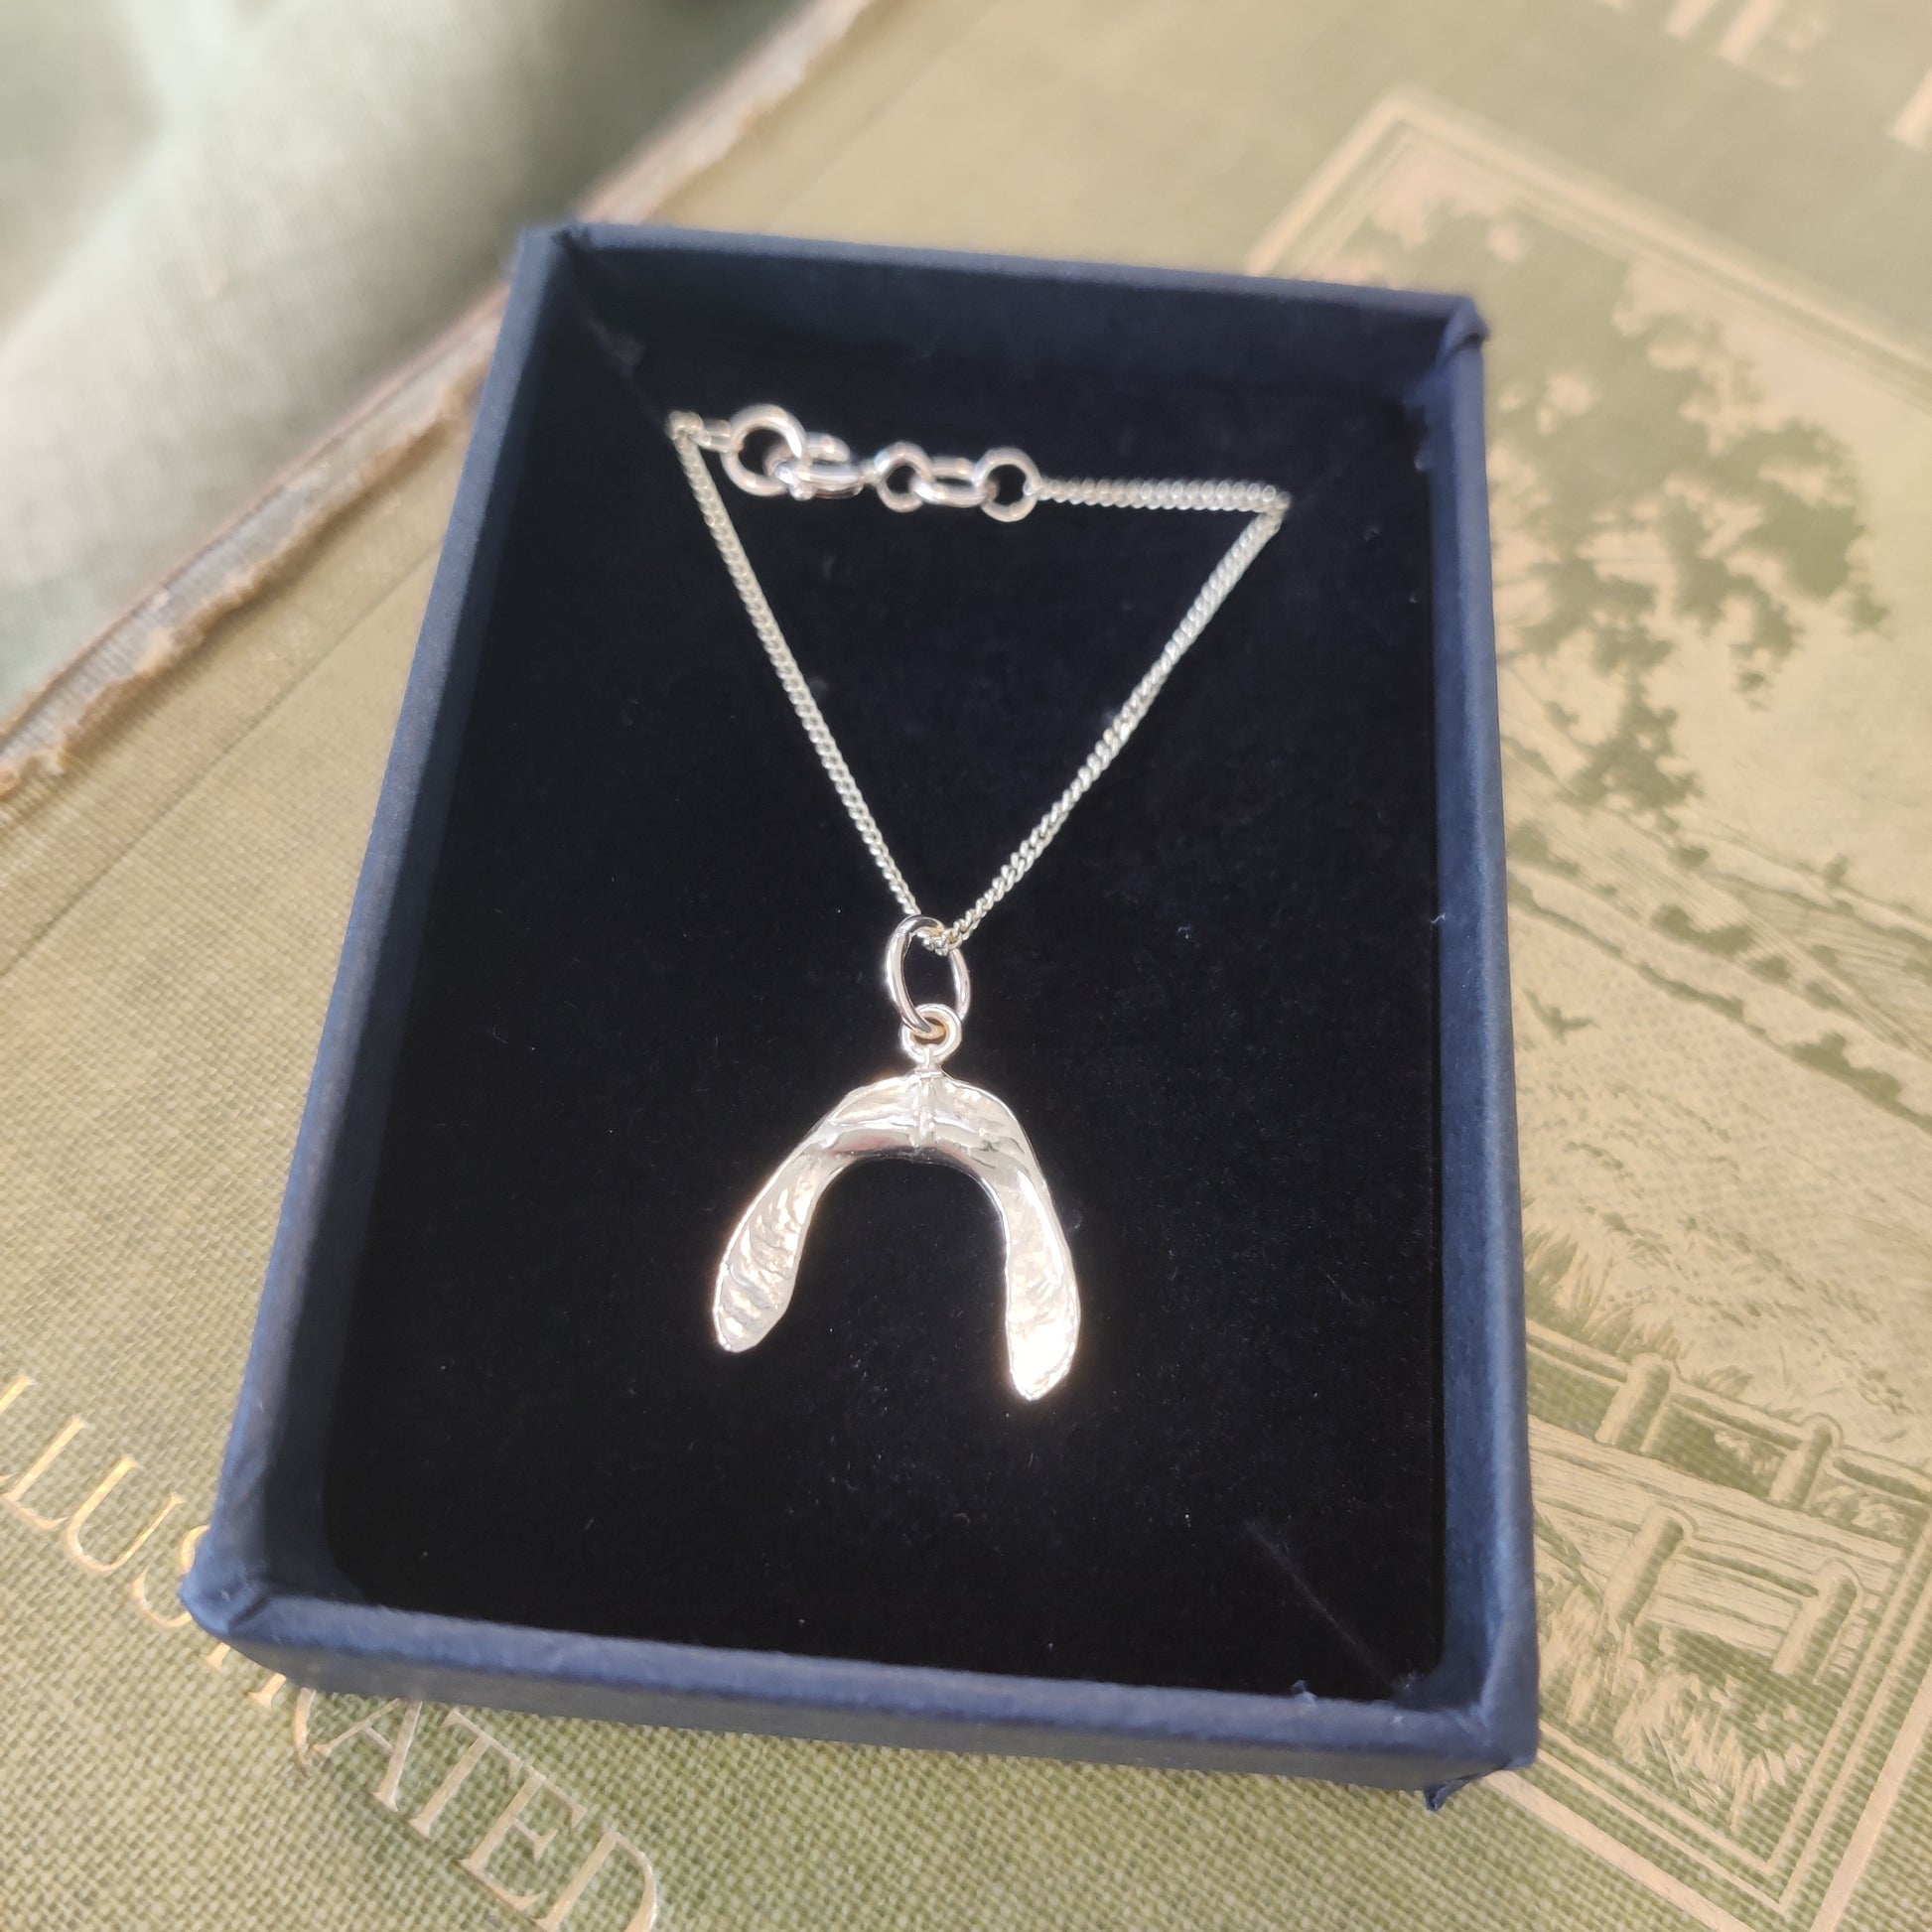 Handmade silver charm necklace by Notion Jewellery.